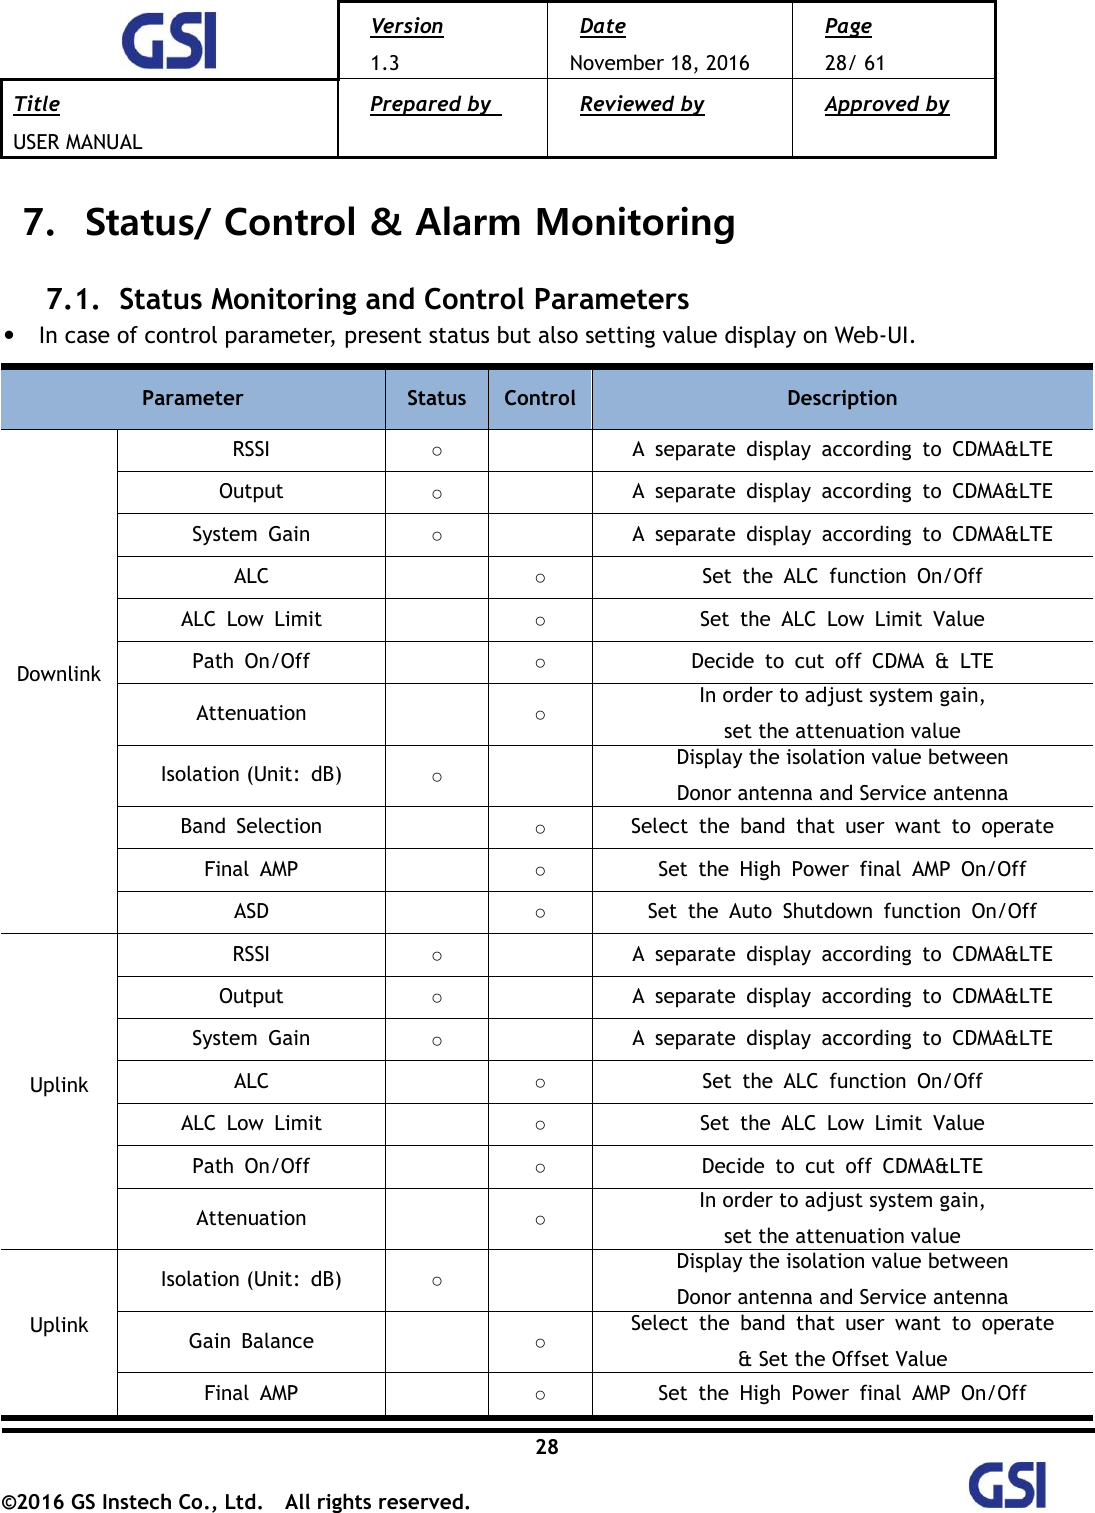  Version 1.3 Date November 18, 2016 Page 28/ 61 Title USER MANUAL Prepared by   Reviewed by  Approved by   28 ©2016 GS Instech Co., Ltd.  All rights reserved.   7.   Status/ Control &amp; Alarm Monitoring 7.1.   Status Monitoring and Control Parameters • In case of control parameter, present status but also setting value display on Web-UI. Parameter Status Control Description Downlink RSSI ○  A  separate  display  according  to  CDMA&amp;LTE Output ○  A  separate  display  according  to  CDMA&amp;LTE System  Gain ○  A  separate  display  according  to  CDMA&amp;LTE ALC  ○ Set  the  ALC  function  On/Off ALC  Low  Limit  ○ Set  the  ALC  Low  Limit  Value Path  On/Off  ○ Decide  to  cut  off  CDMA  &amp;  LTE Attenuation  ○ In order to adjust system gain,   set the attenuation value Isolation (Unit:  dB) ○  Display the isolation value between   Donor antenna and Service antenna   Band  Selection  ○ Select  the  band  that  user  want  to  operate Final  AMP  ○ Set  the  High  Power  final  AMP  On/Off ASD  ○ Set  the  Auto  Shutdown  function  On/Off Uplink RSSI ○  A  separate  display  according  to  CDMA&amp;LTE Output ○  A  separate  display  according  to  CDMA&amp;LTE System  Gain ○  A  separate  display  according  to  CDMA&amp;LTE ALC  ○ Set  the  ALC  function  On/Off ALC  Low  Limit  ○ Set  the  ALC  Low  Limit  Value Path  On/Off  ○ Decide  to  cut  off  CDMA&amp;LTE Attenuation  ○ In order to adjust system gain,   set the attenuation value Uplink Isolation (Unit:  dB) ○  Display the isolation value between   Donor antenna and Service antenna   Gain  Balance  ○ Select  the  band  that  user  want  to  operate &amp; Set the Offset Value Final  AMP  ○ Set  the  High  Power  final  AMP  On/Off 